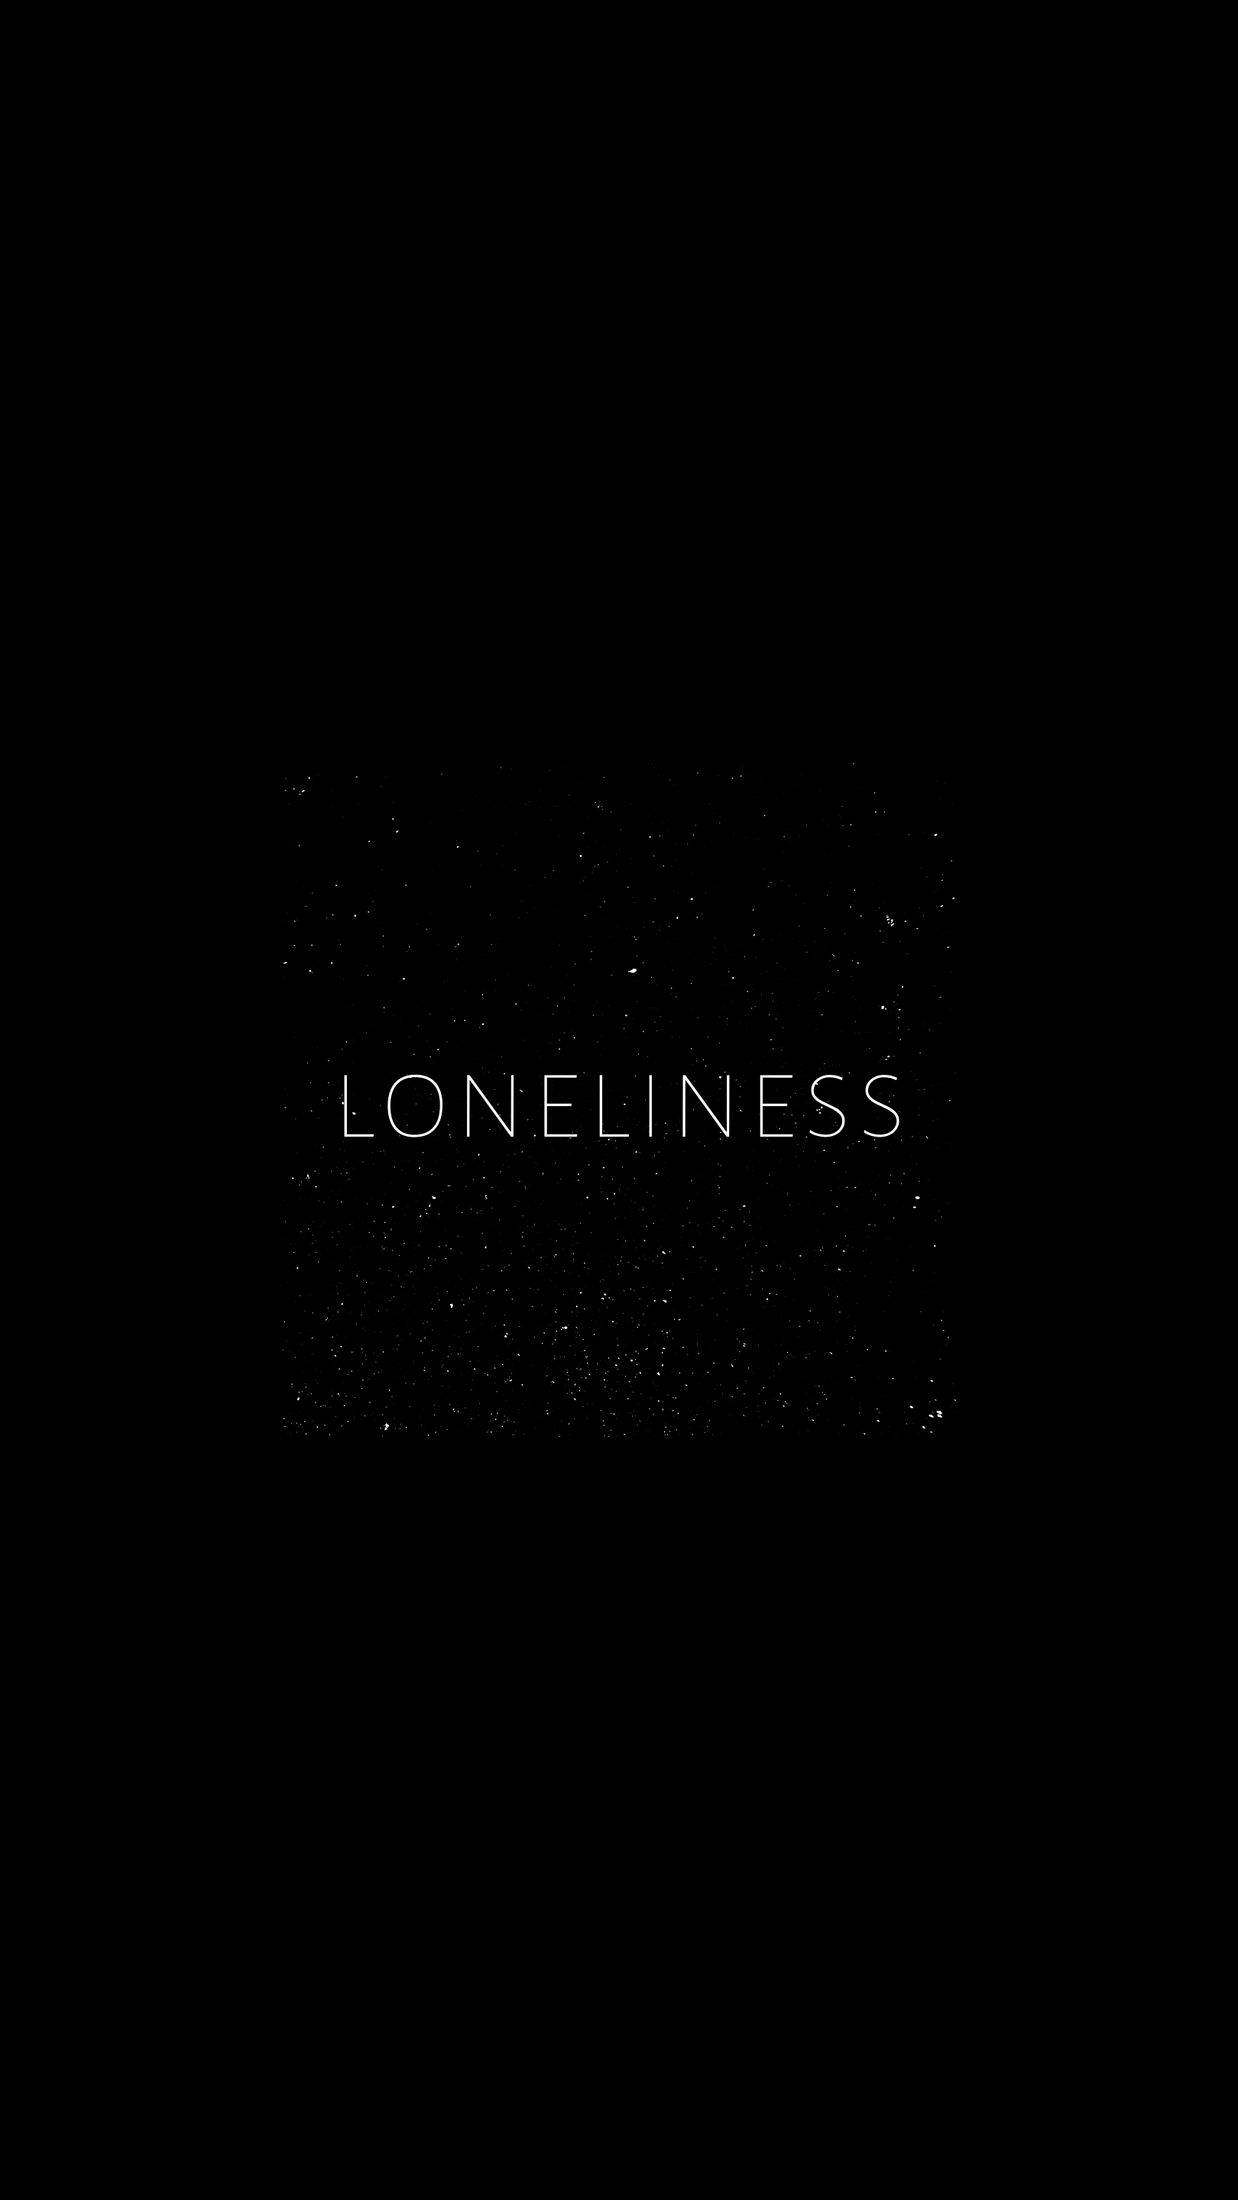 Download mobile wallpaper: Alone, Loneliness, Lonely, Minimalism